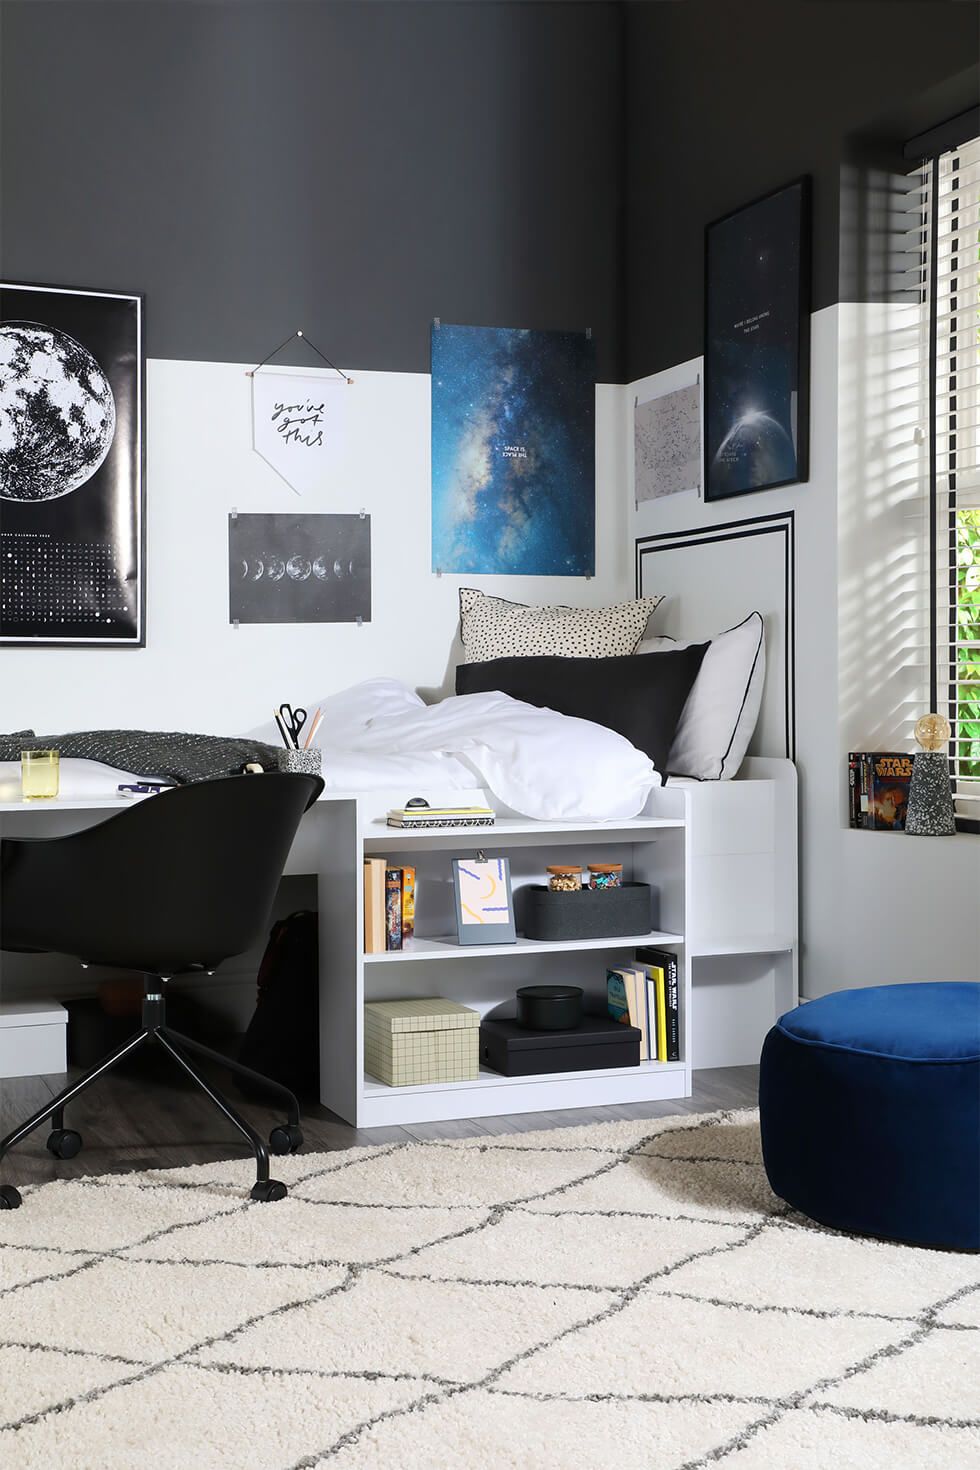 Space-themed bedroom with two-tone walls and galaxy posters